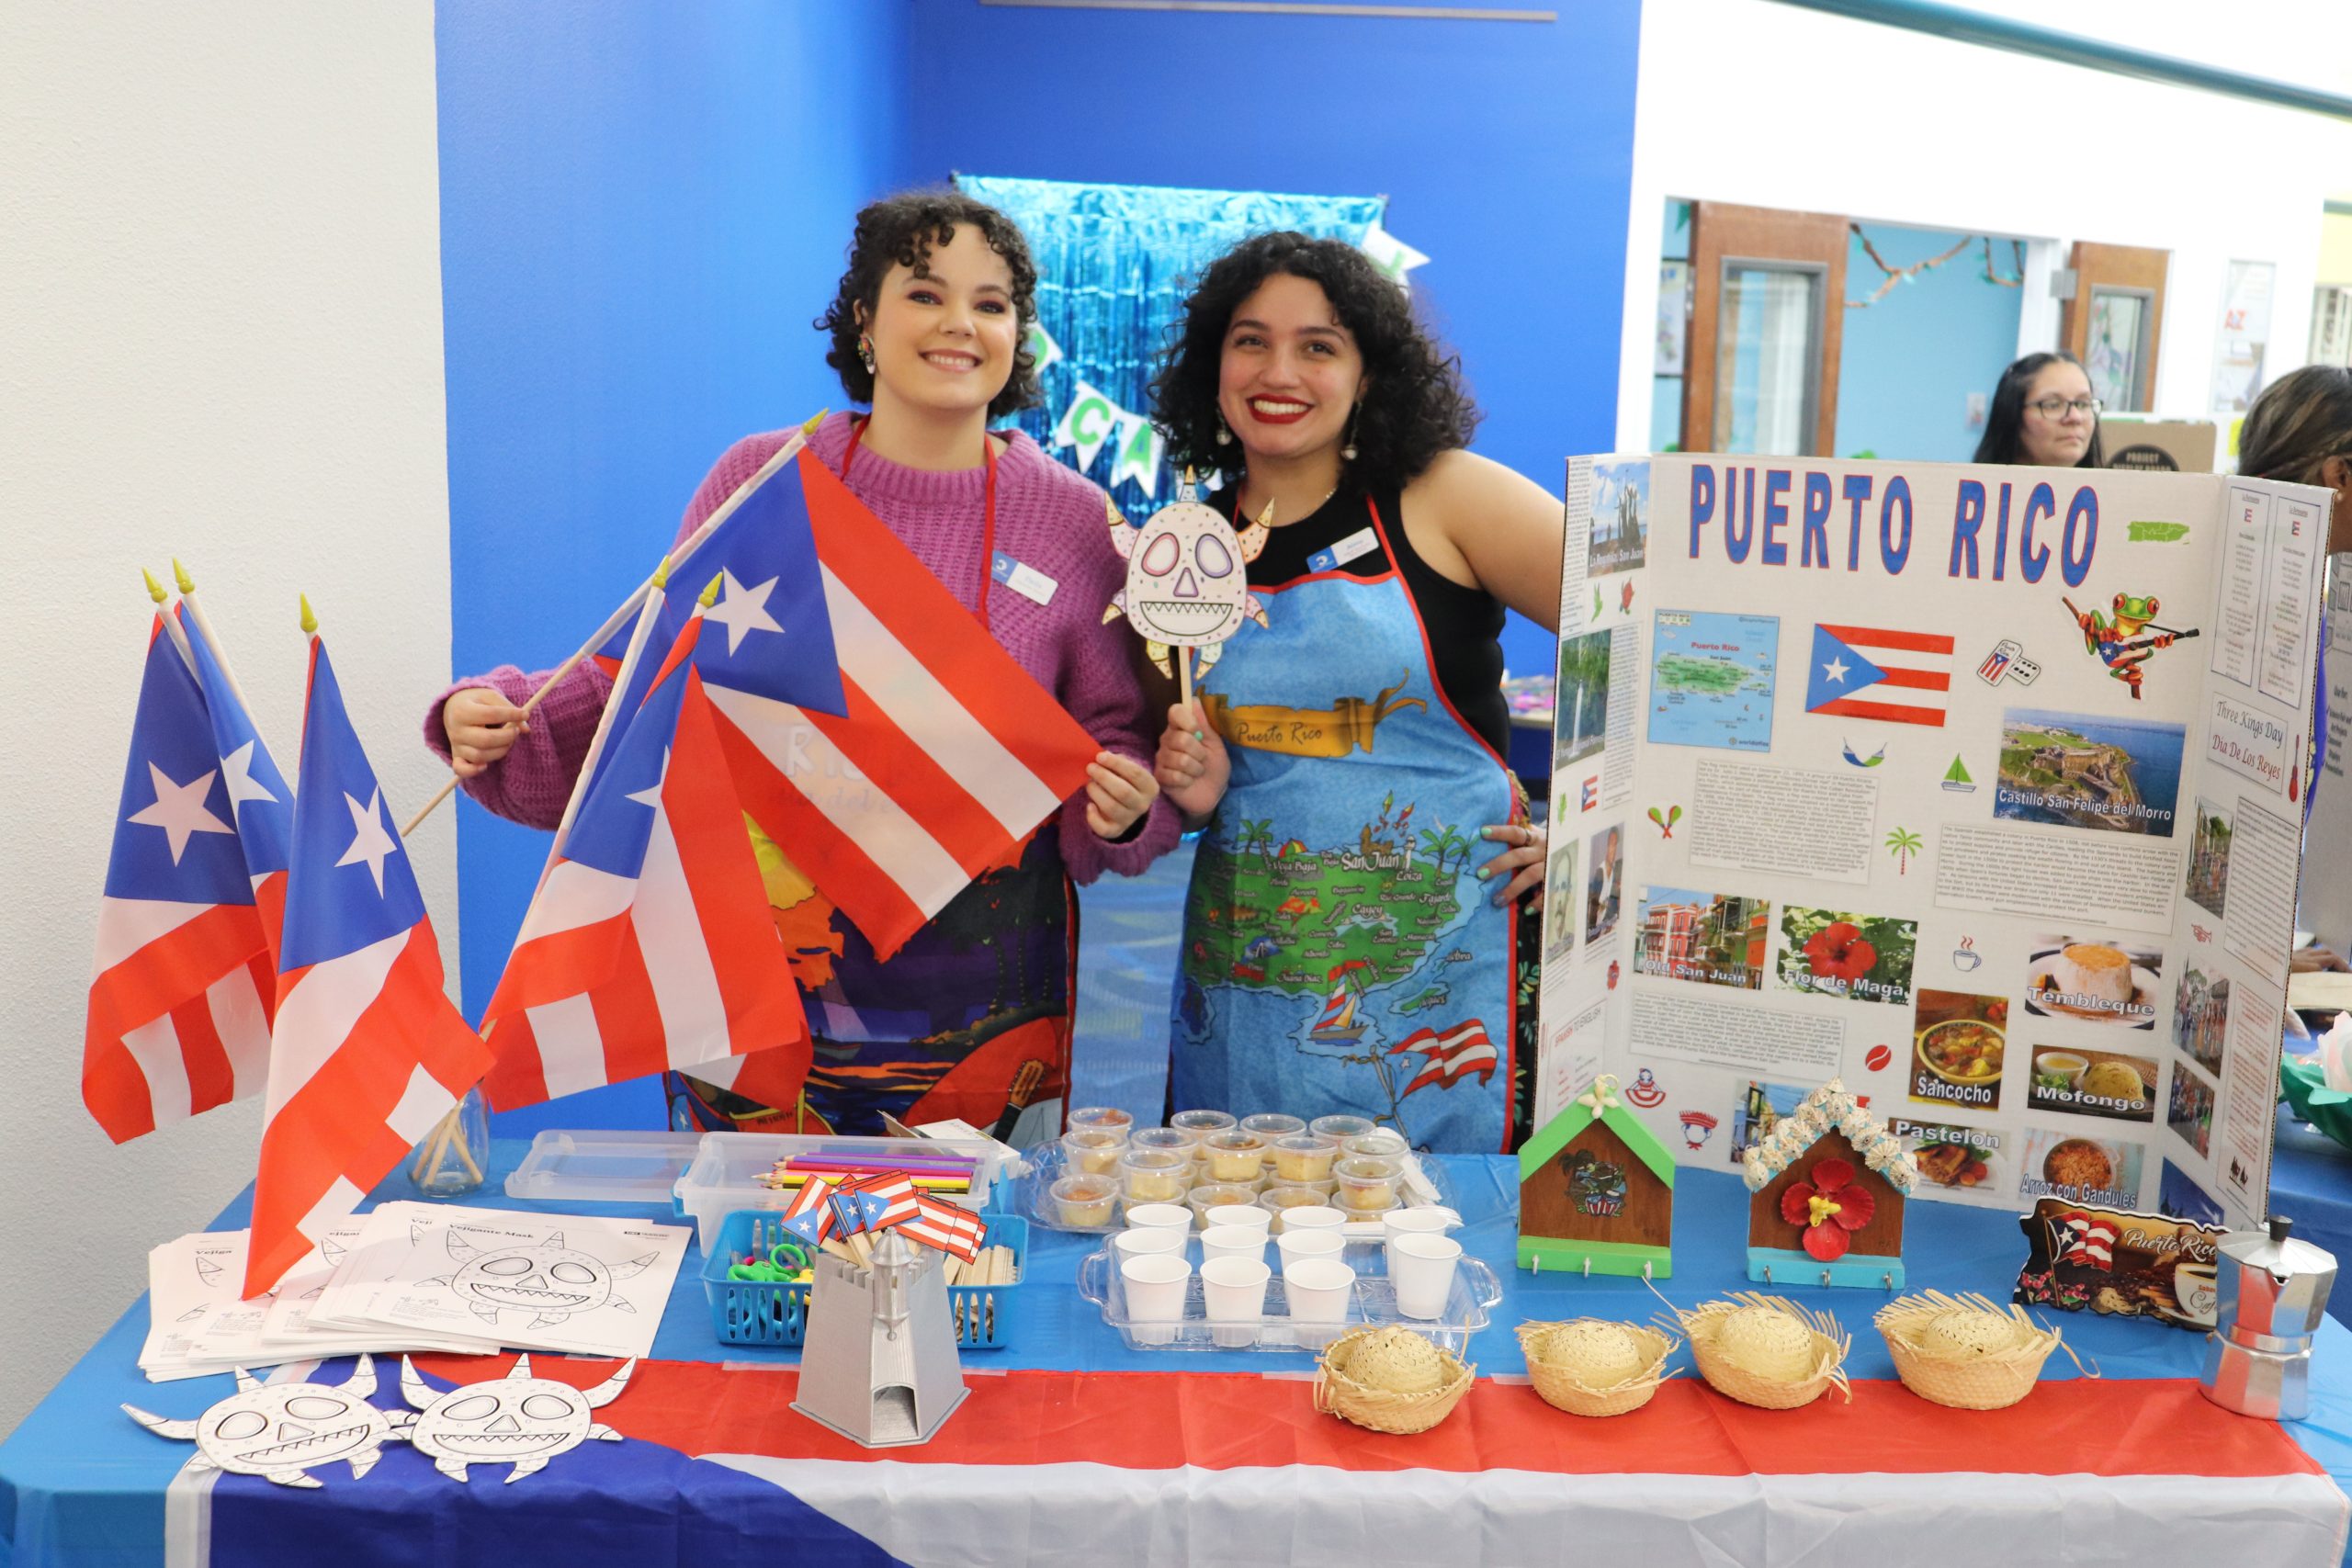 Two members of staff pose in front of a table decorated for the International Festival.